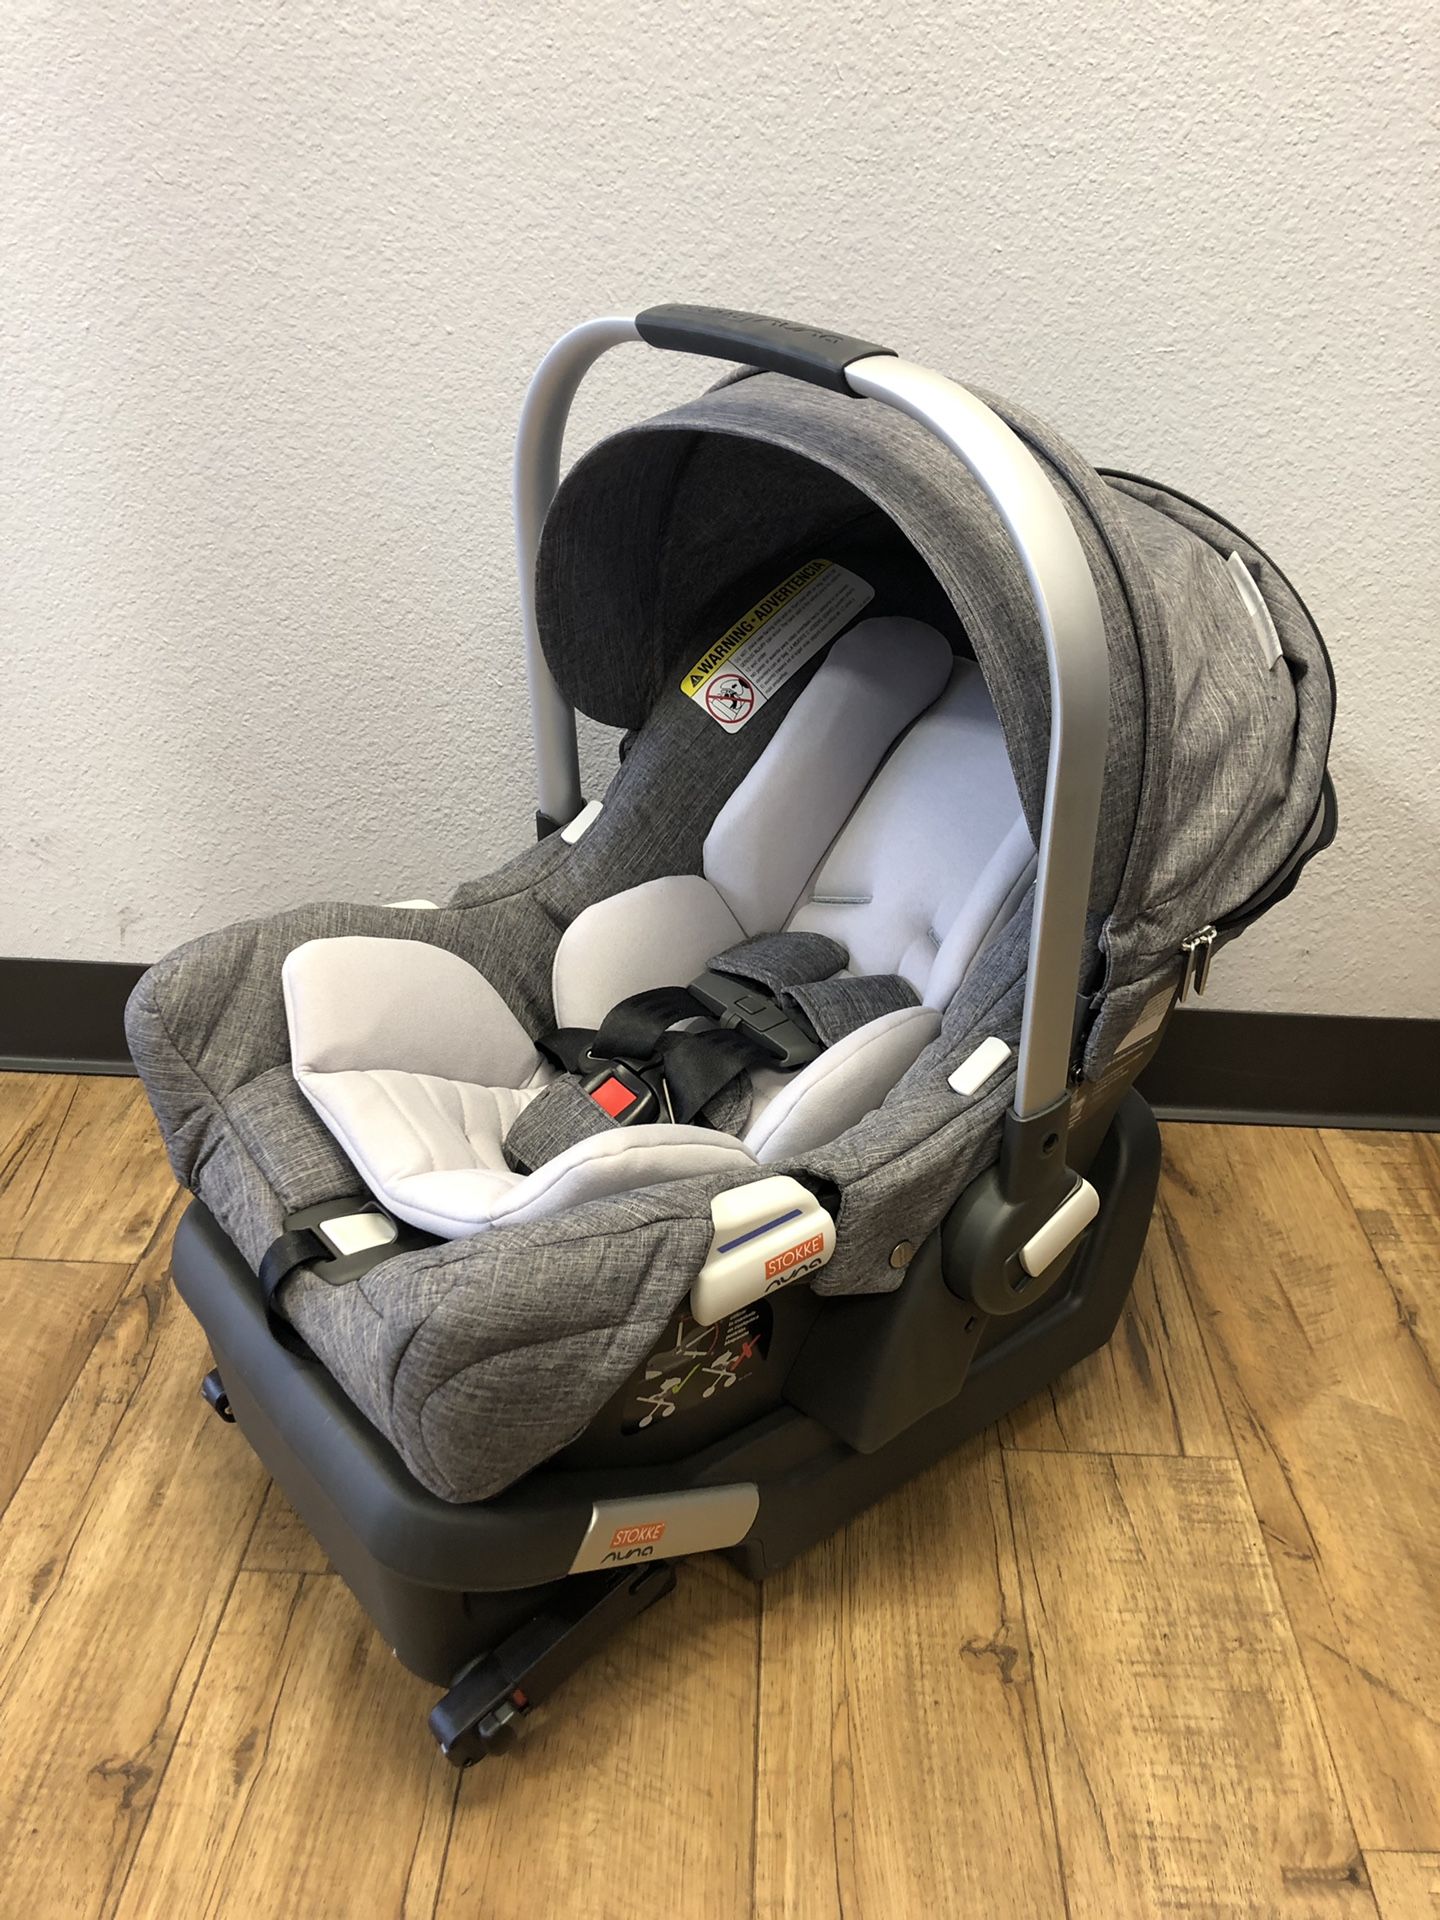 Stokke PIPA Infant Car Seat and Base for Xplory / Trailz / Scoot